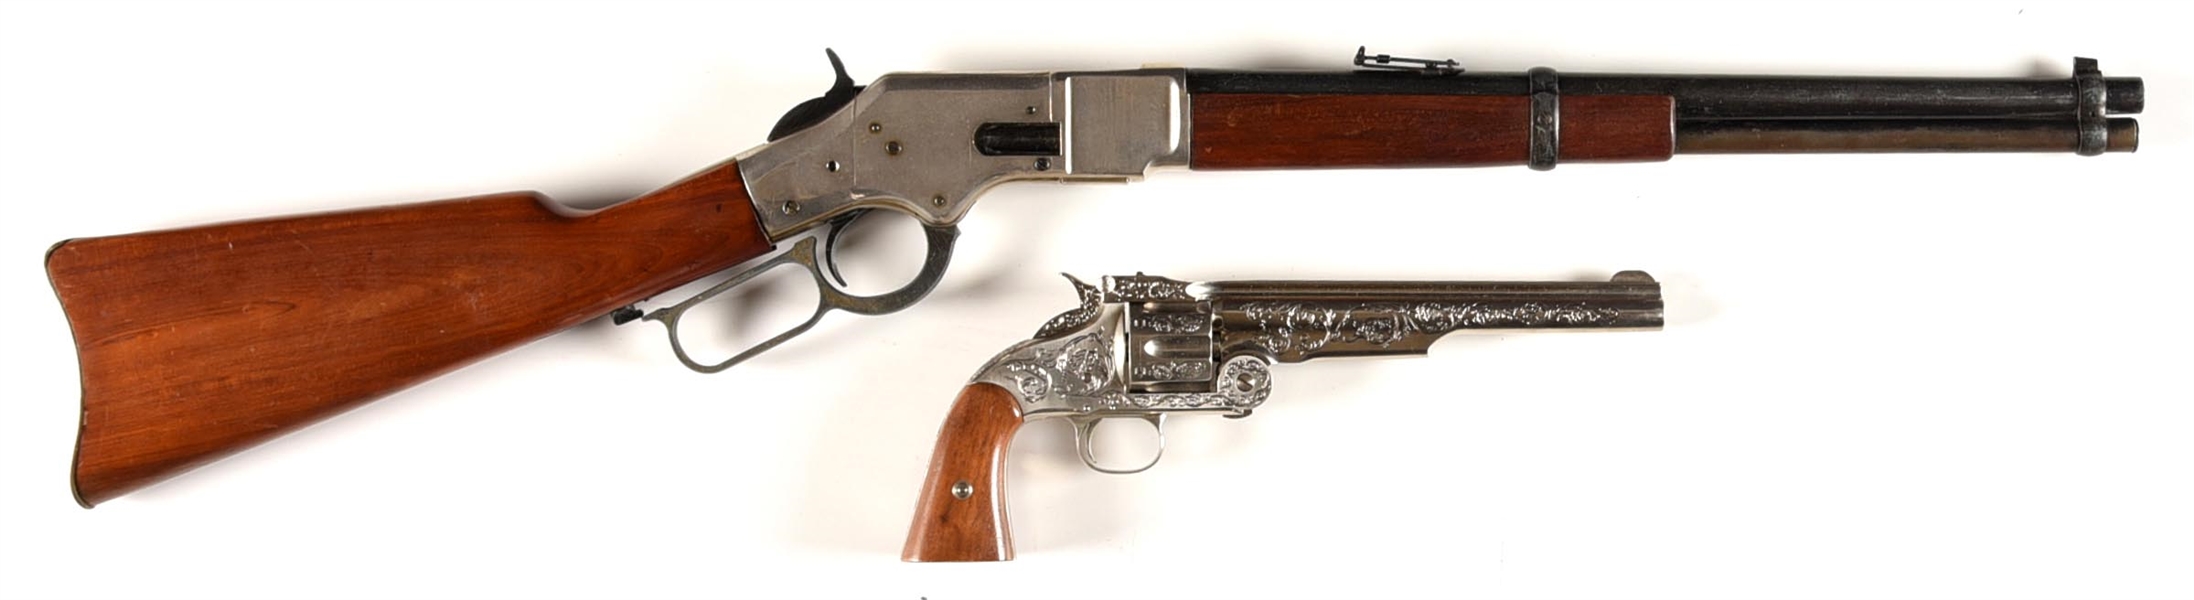 LOT OF 2: PROP GUNS: WINCHESTER 1866 AND SMITH & WESSON NO. 3.